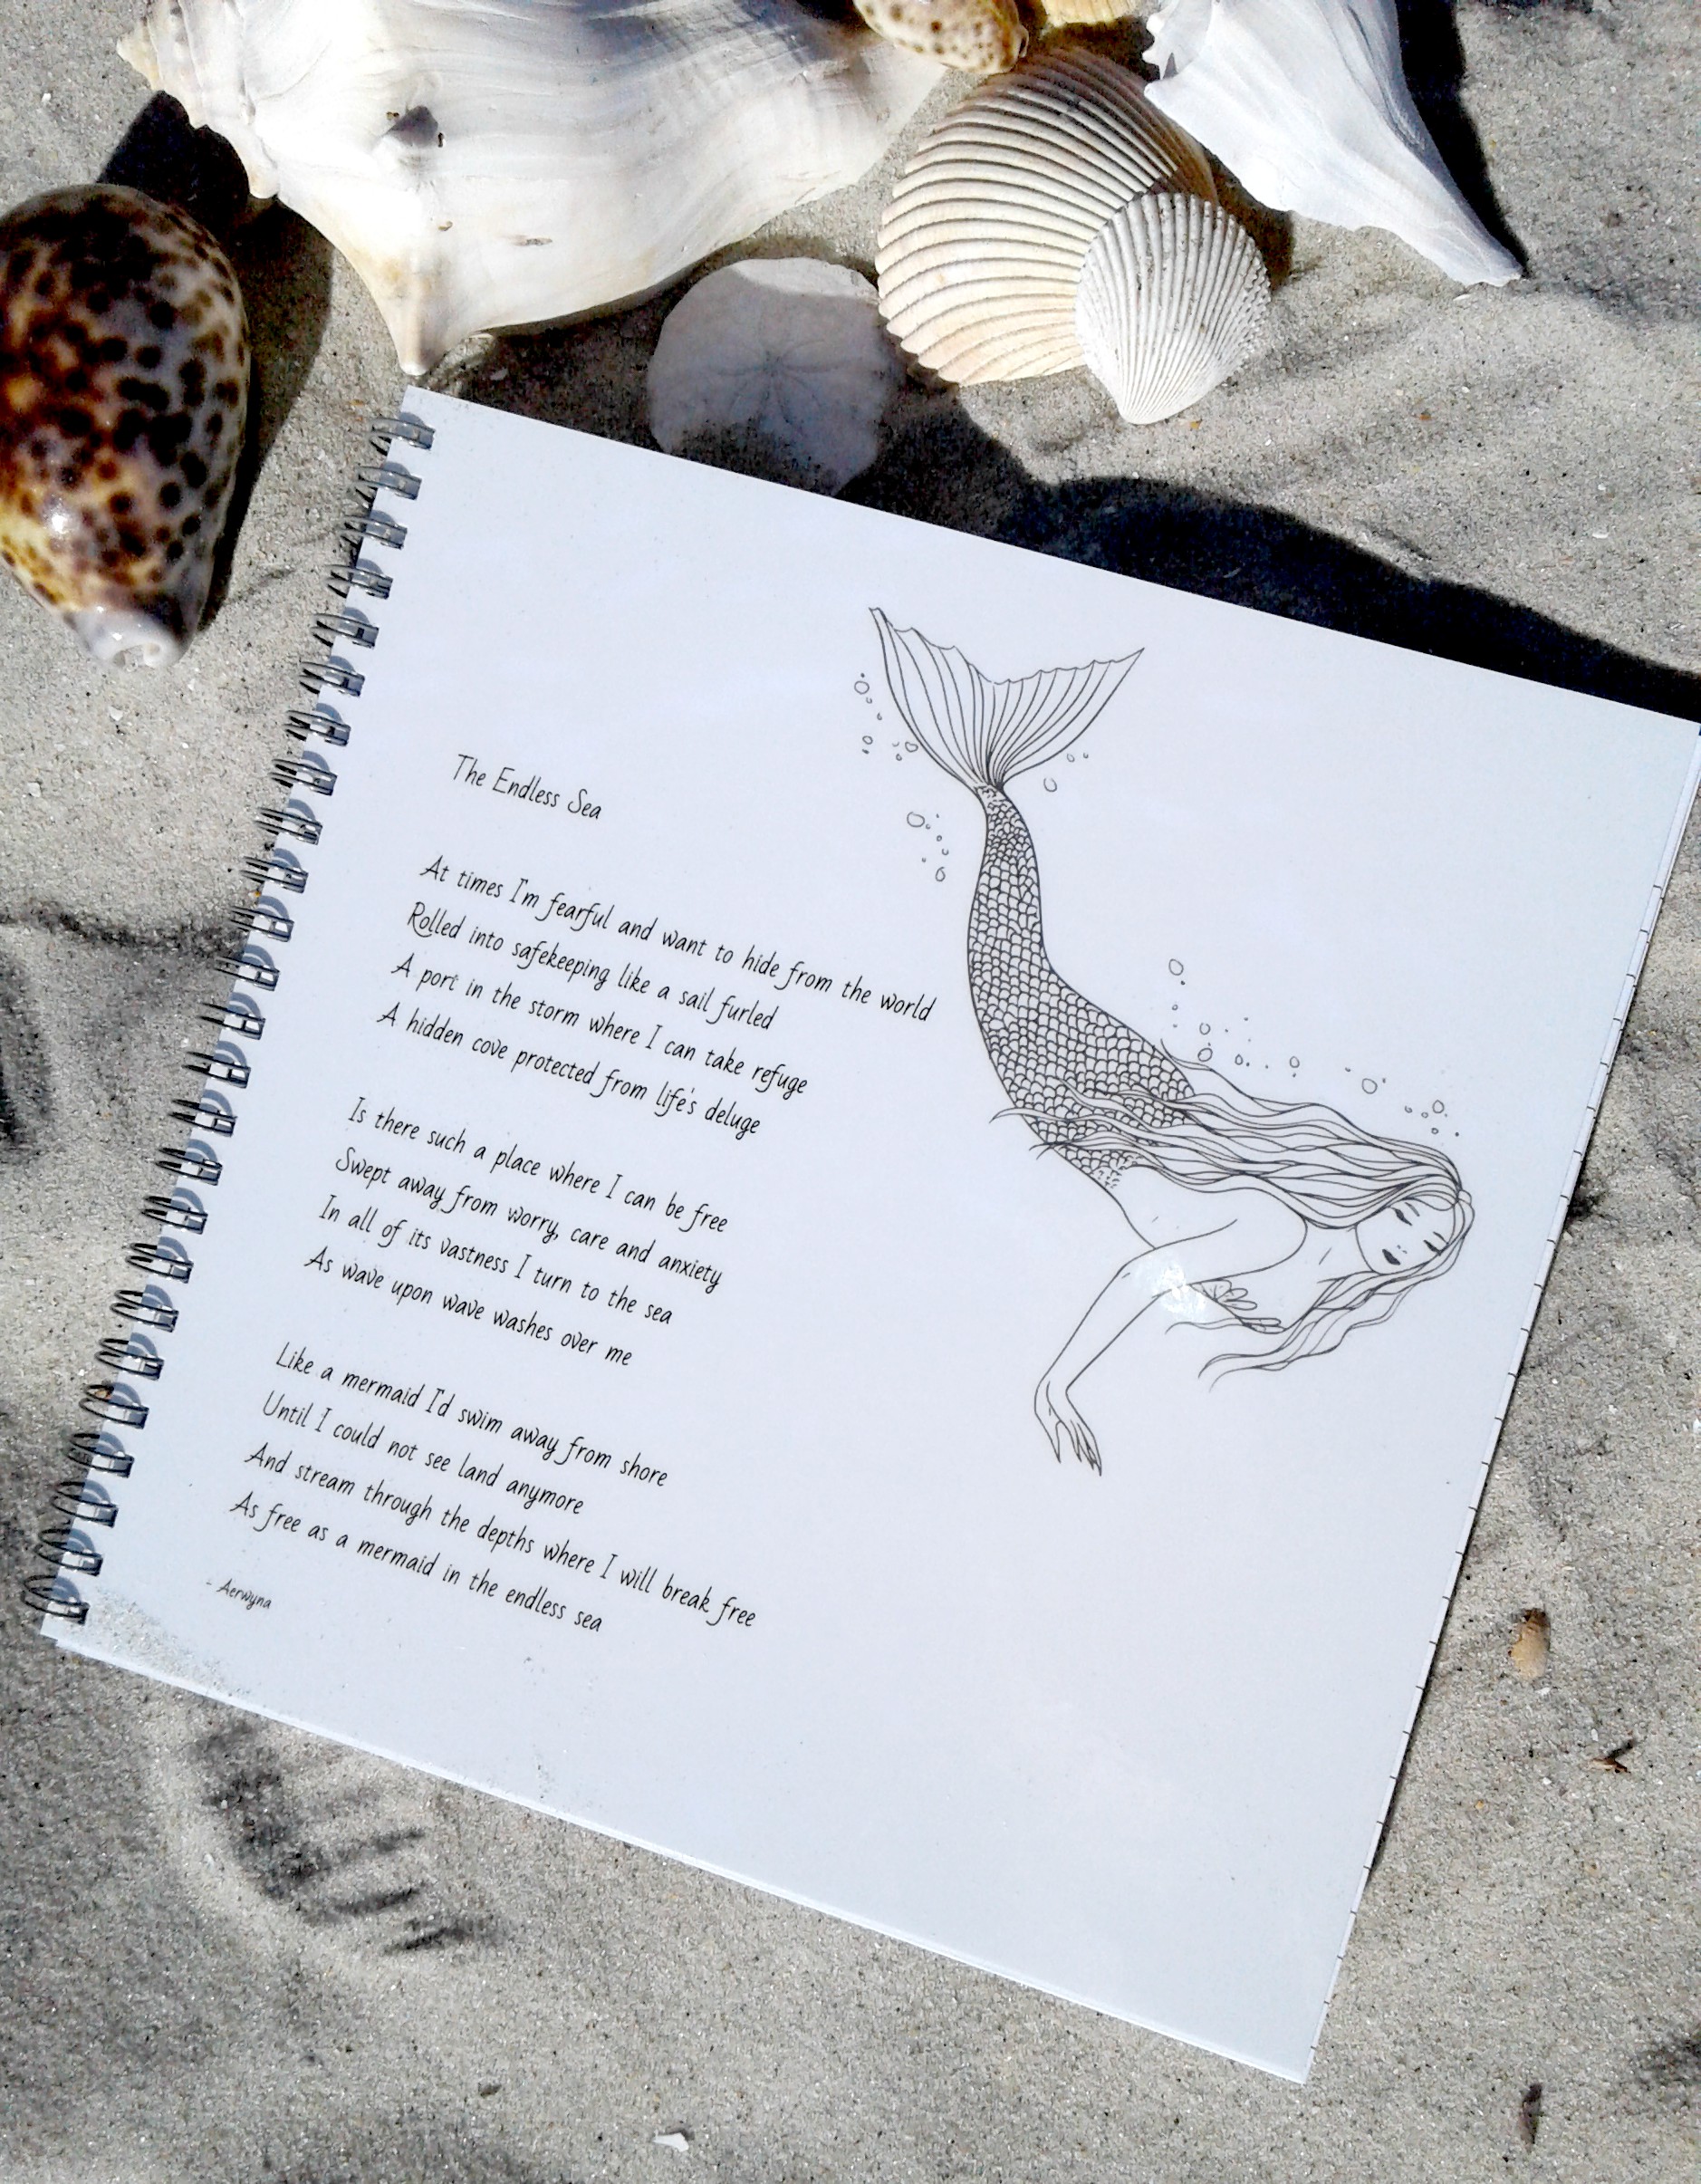 Mermaid Notebook With Poem "The Endless Sea"